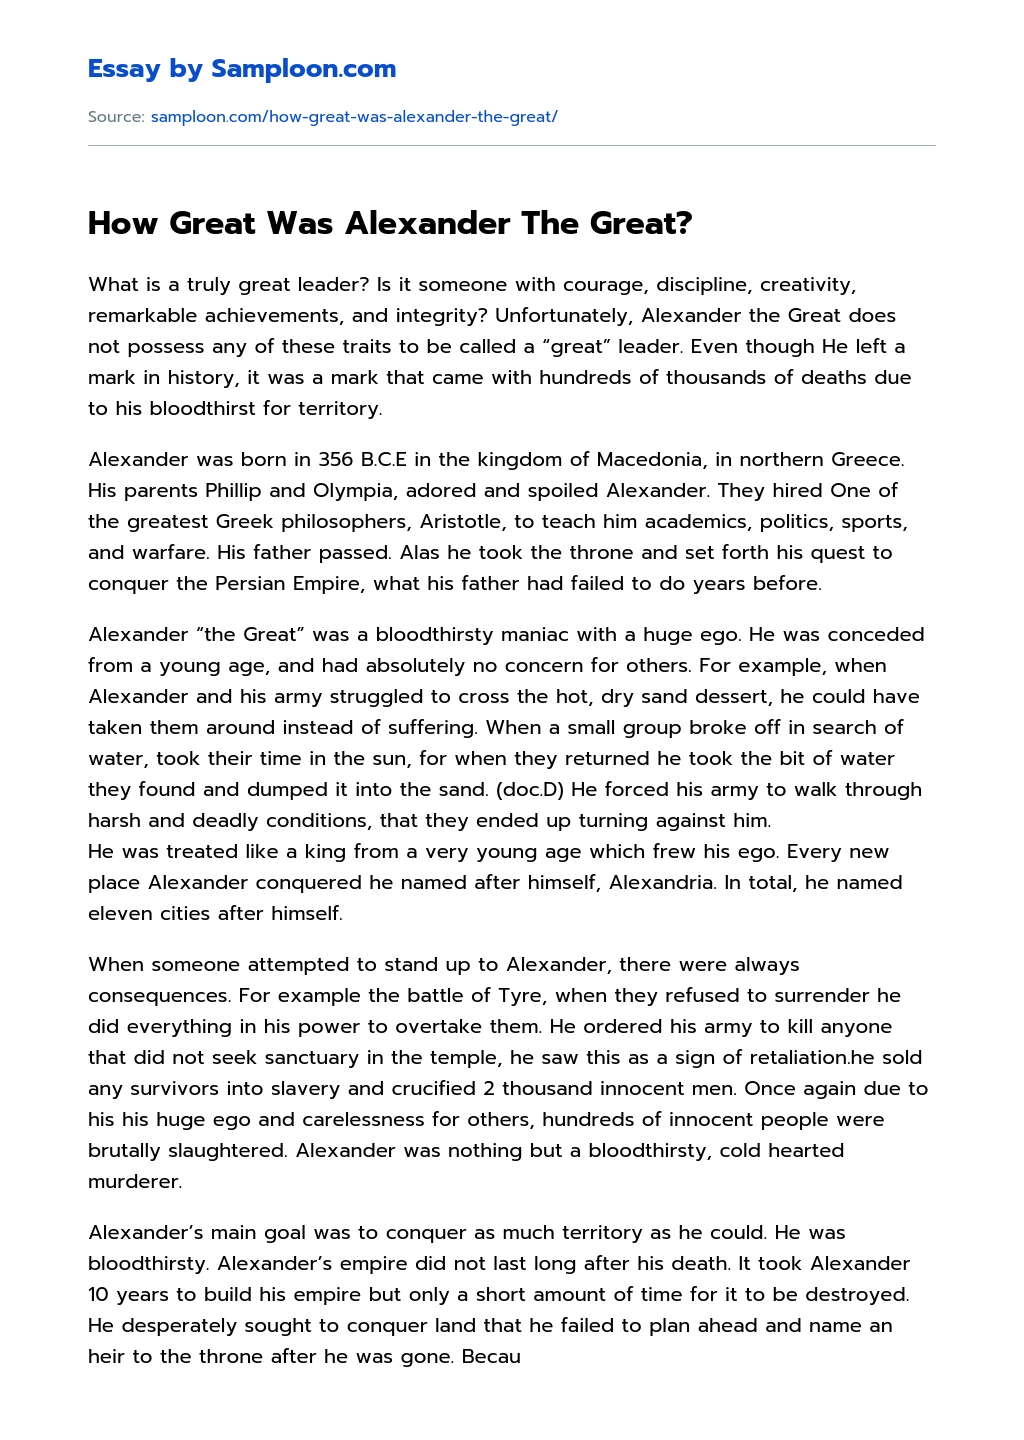 How Great Was Alexander The Great? essay